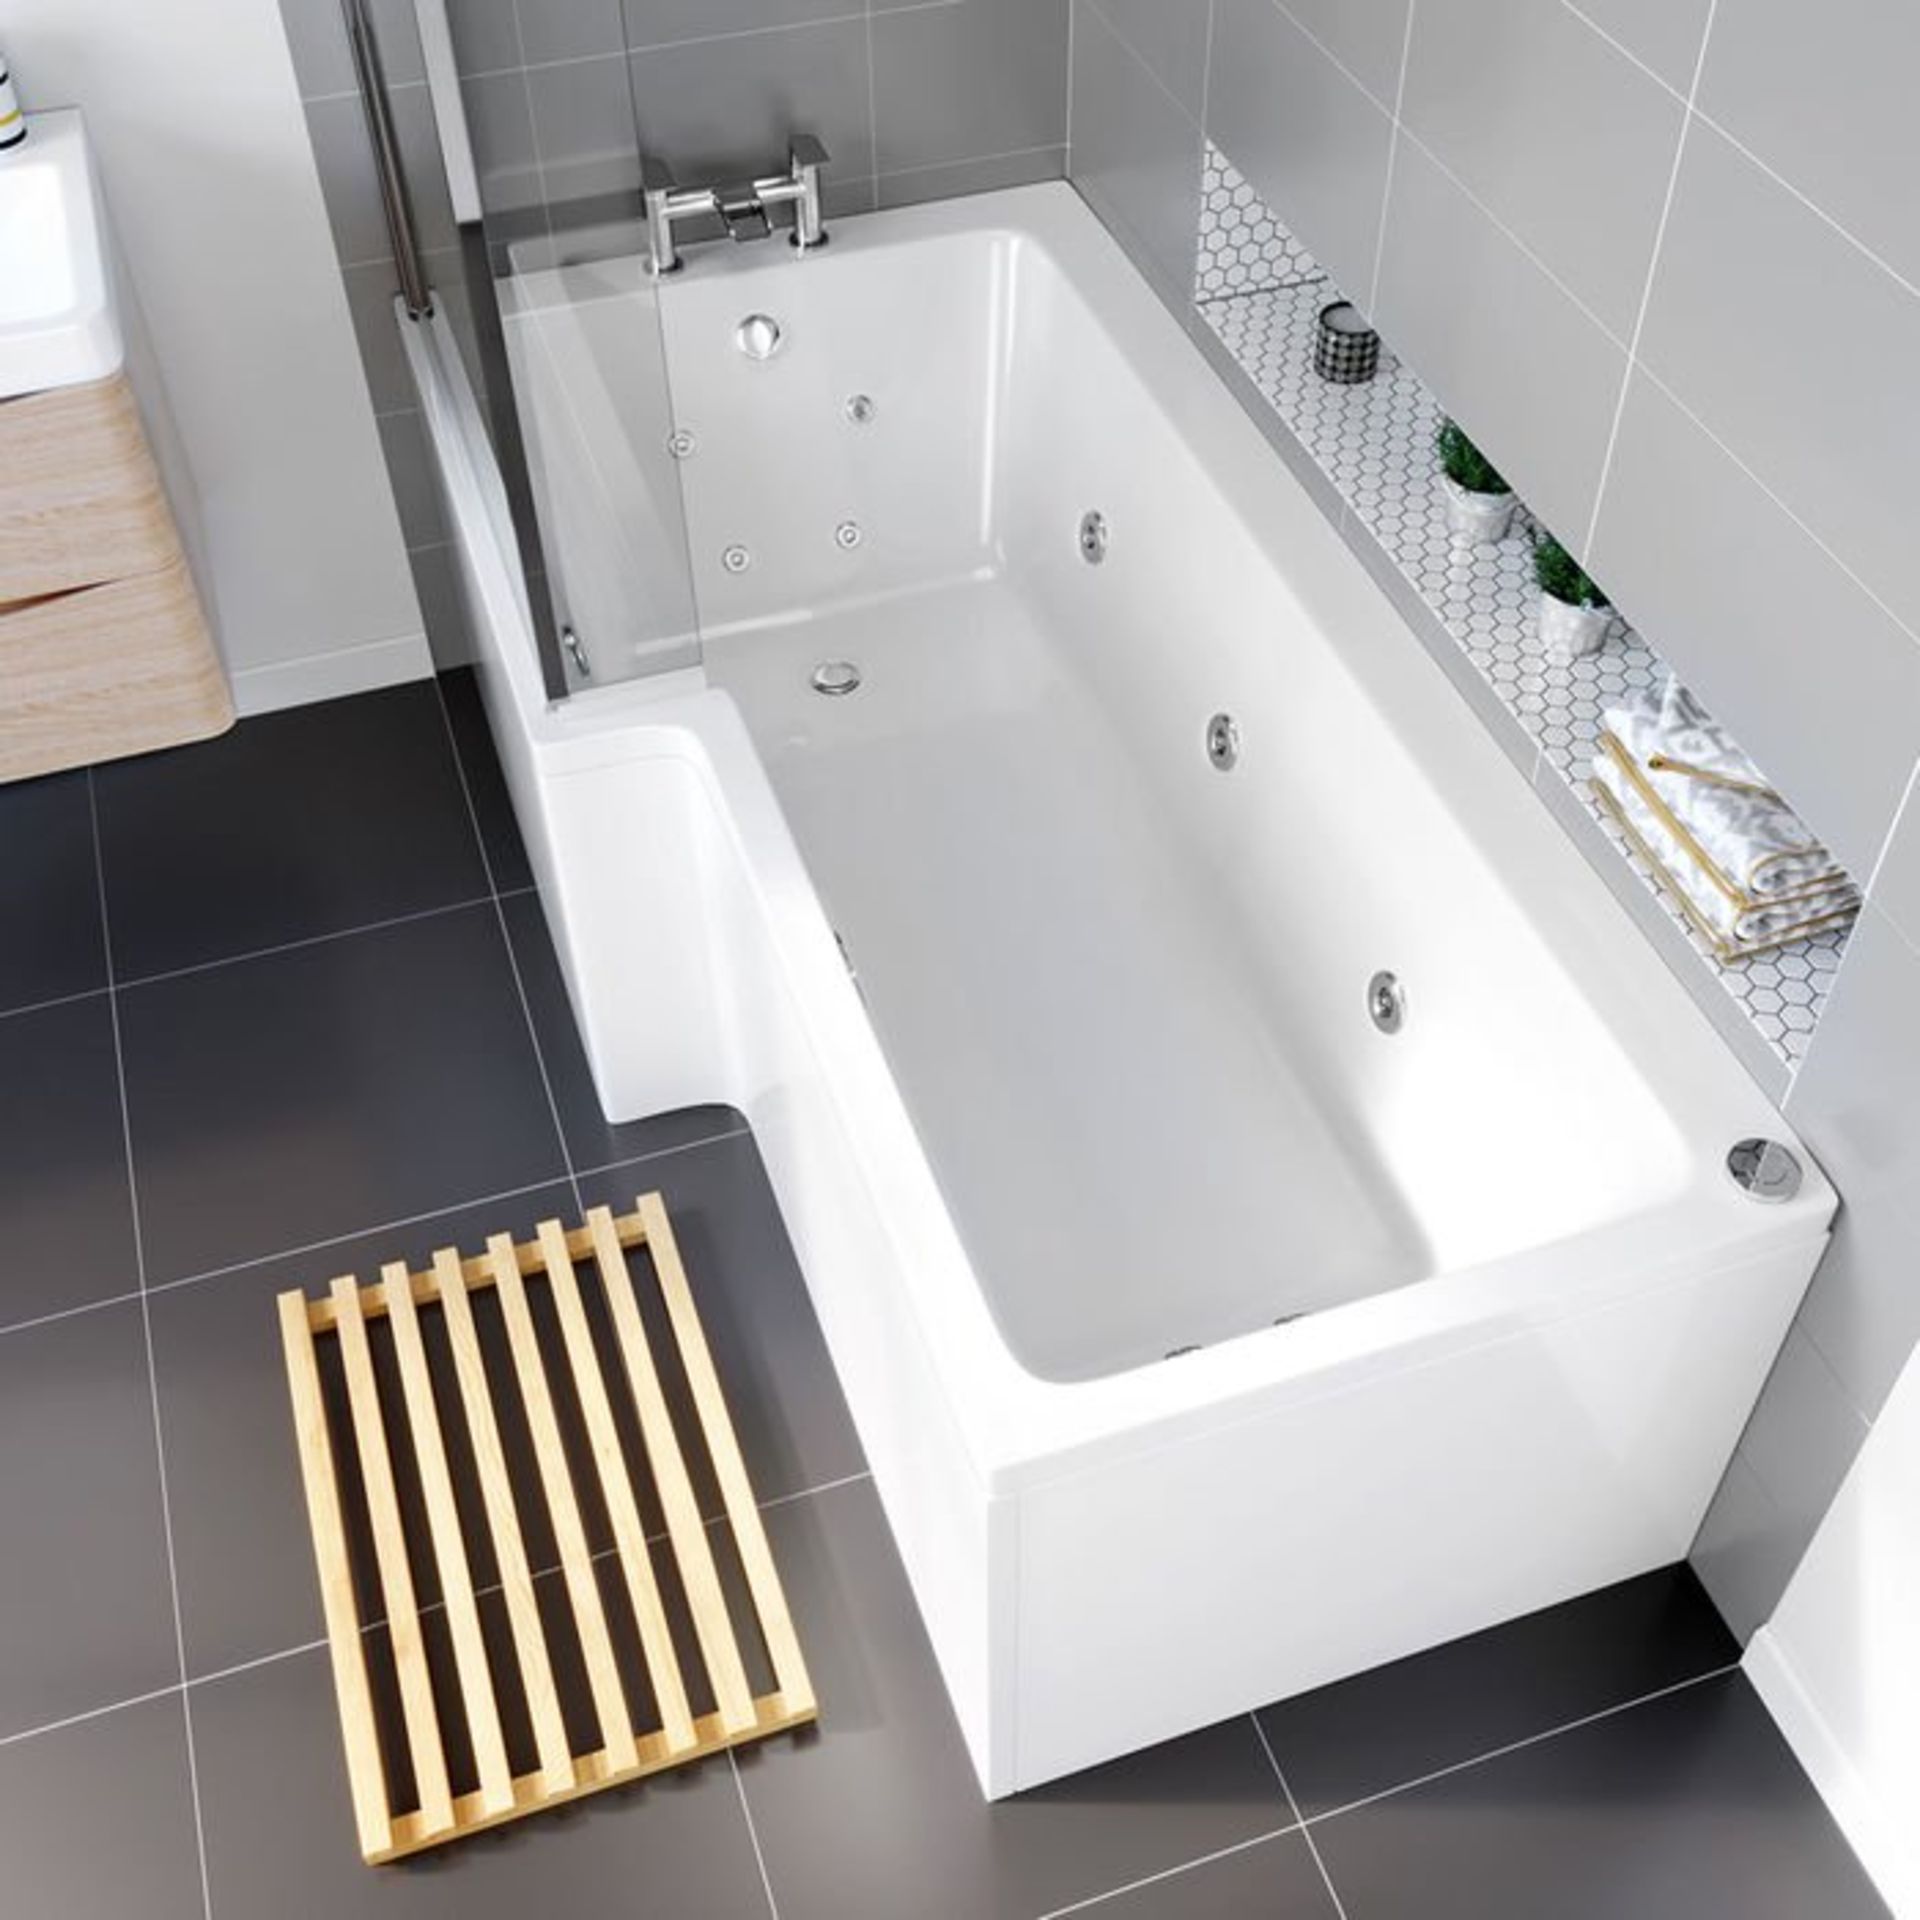 (G70) 1700x700x510mm Whirlpool Left Hand L Shaped Bath - 14 Jets. Indulge in luxury for a truly - Image 2 of 4